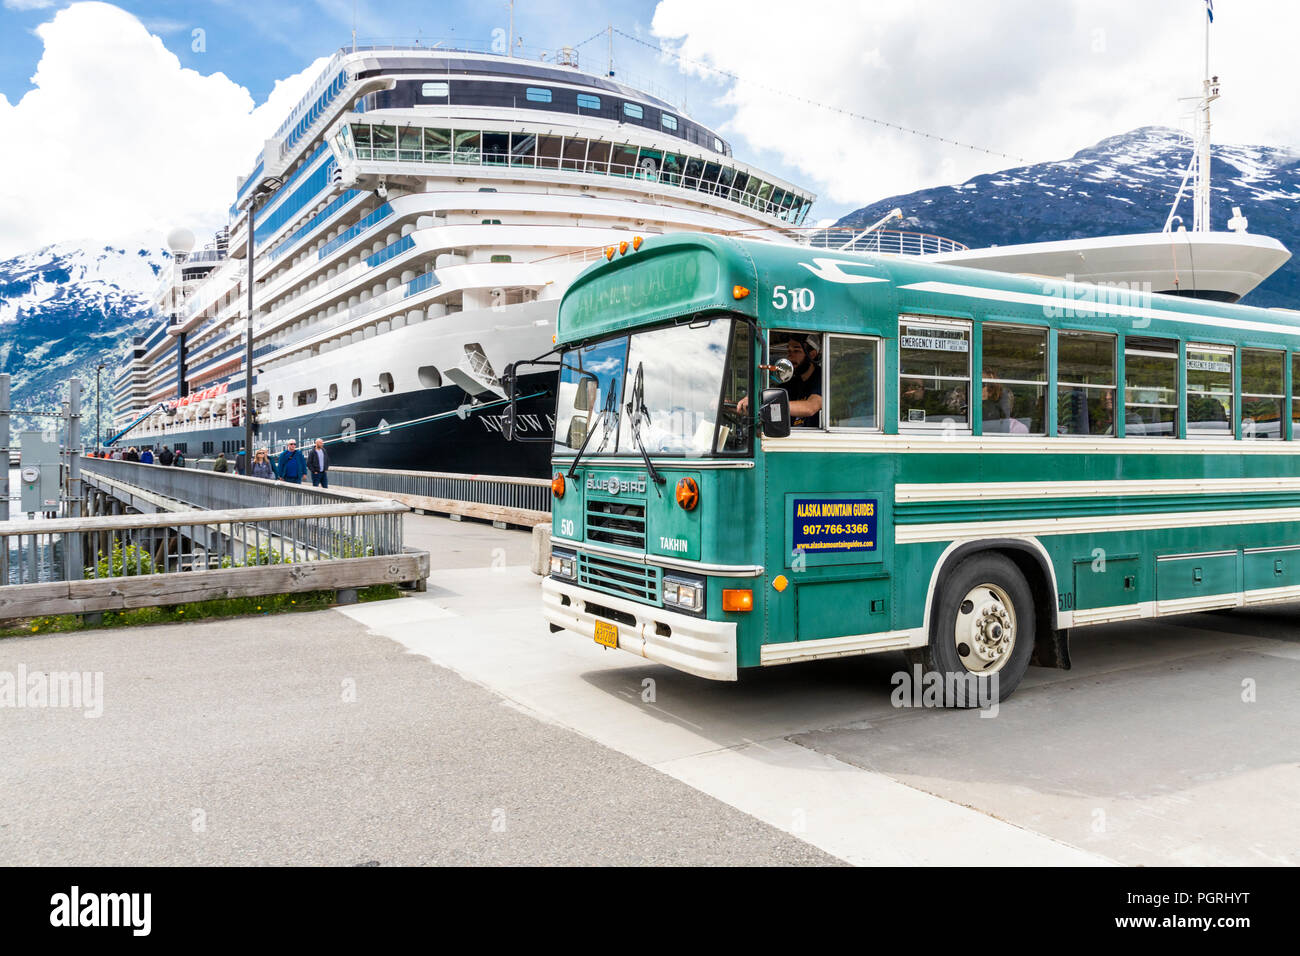 MS Nieuw Amsterdam and a tour bus in the harbour at Skagway, Alaska, USA Stock Photo